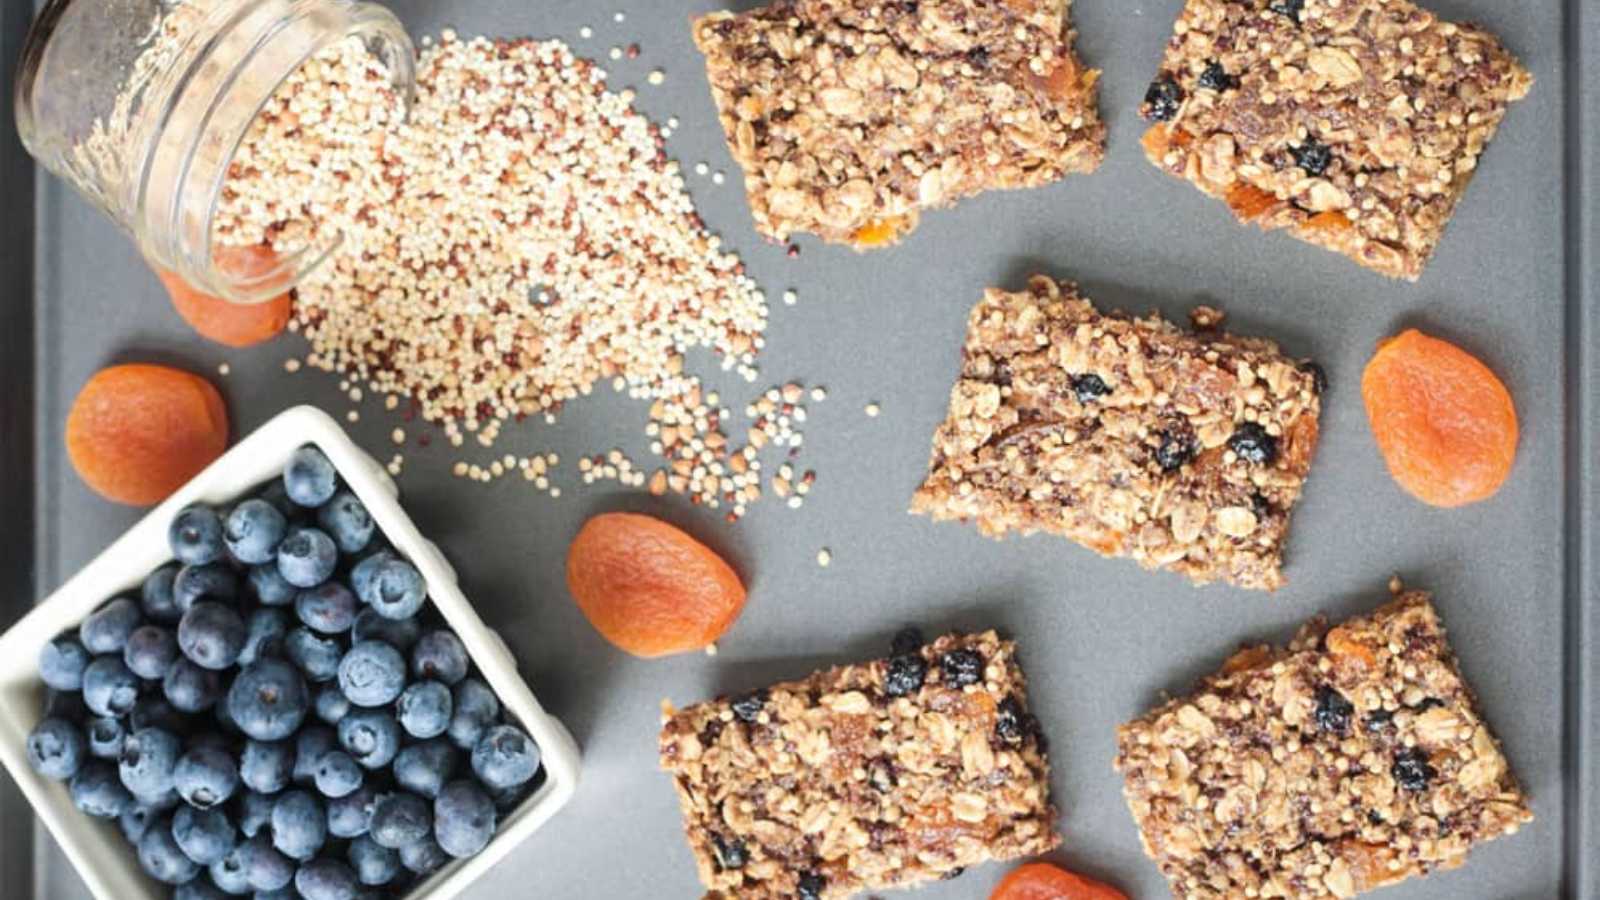 A pieces of ancient grains bars blend of nutritious ancient grains, dried fruits, and nuts in a pan with a bowl of black cherries in bowl.